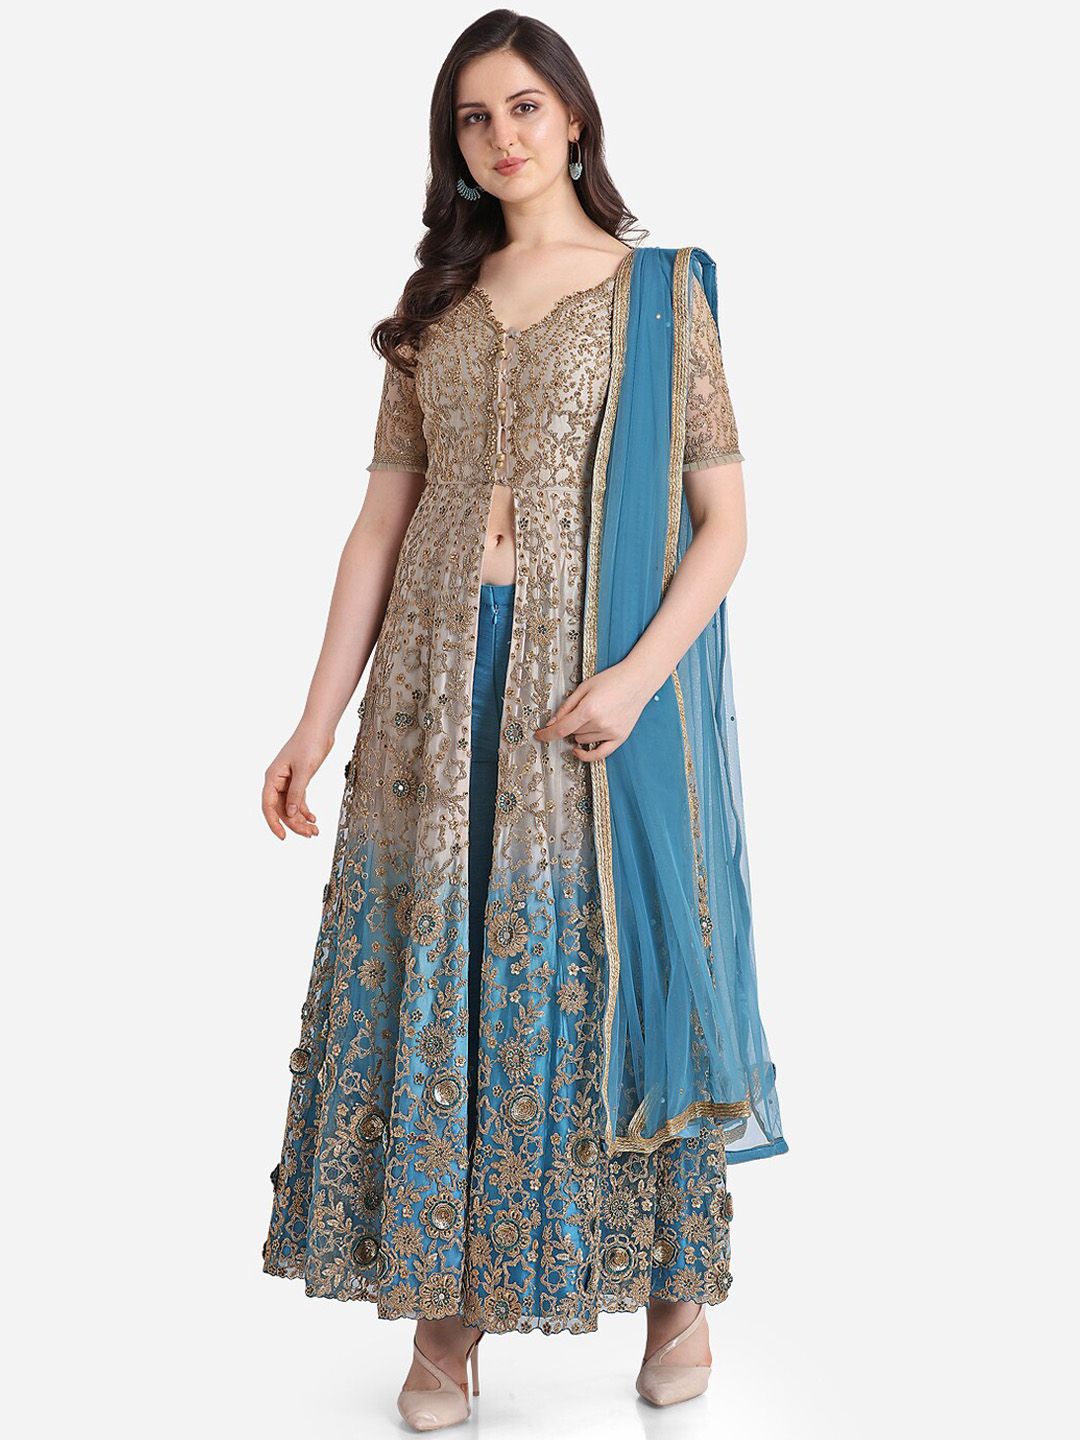 Stylee LIFESTYLE Beige & Blue Net Semi-Stitched Dress Material Price in India